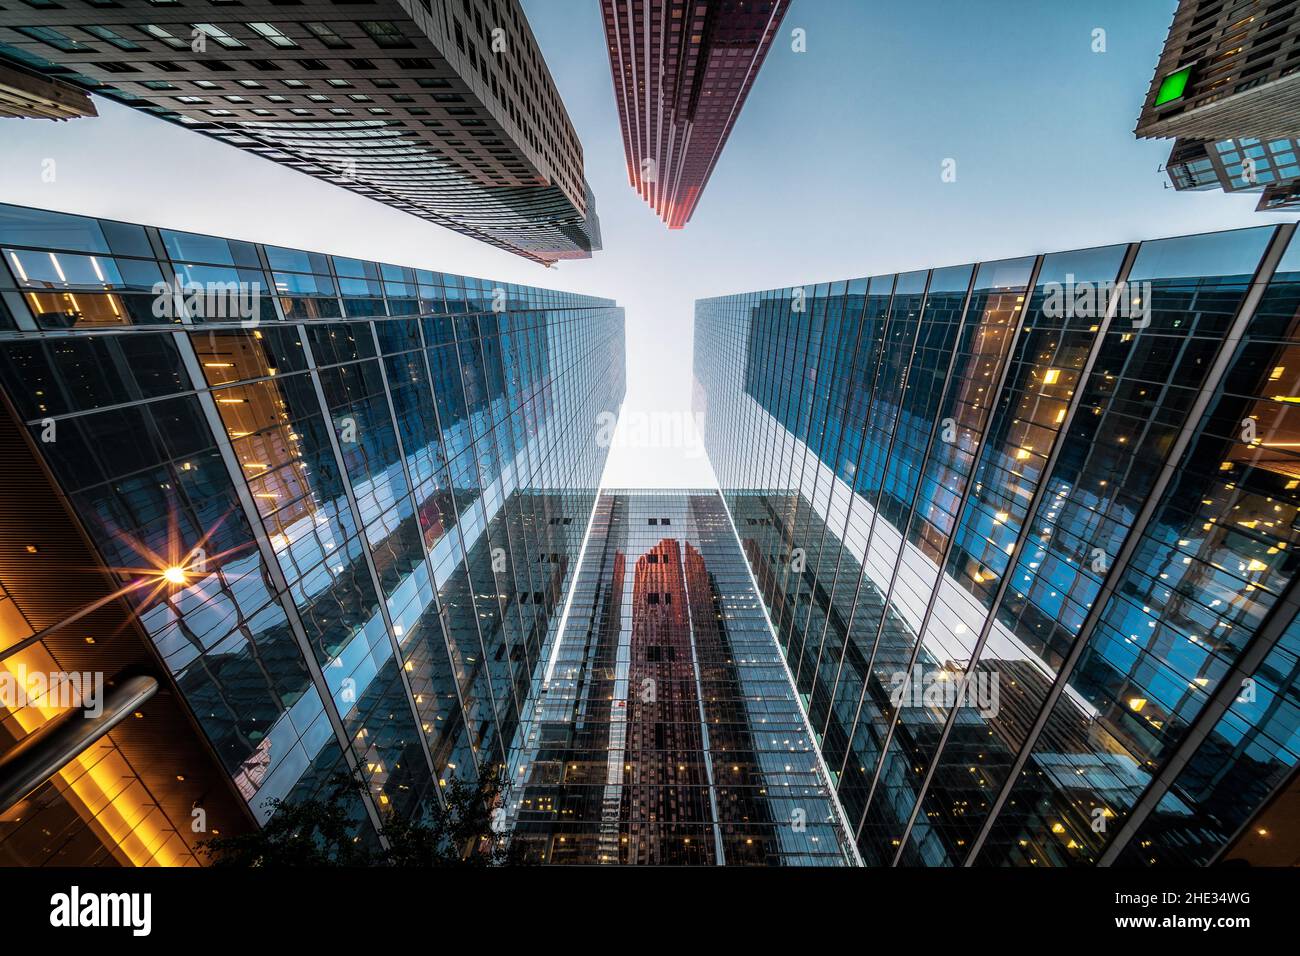 Business and finance concept, looking up at high rise office building architecture at sunset in the financial district of a modern metropolis. Stock Photo